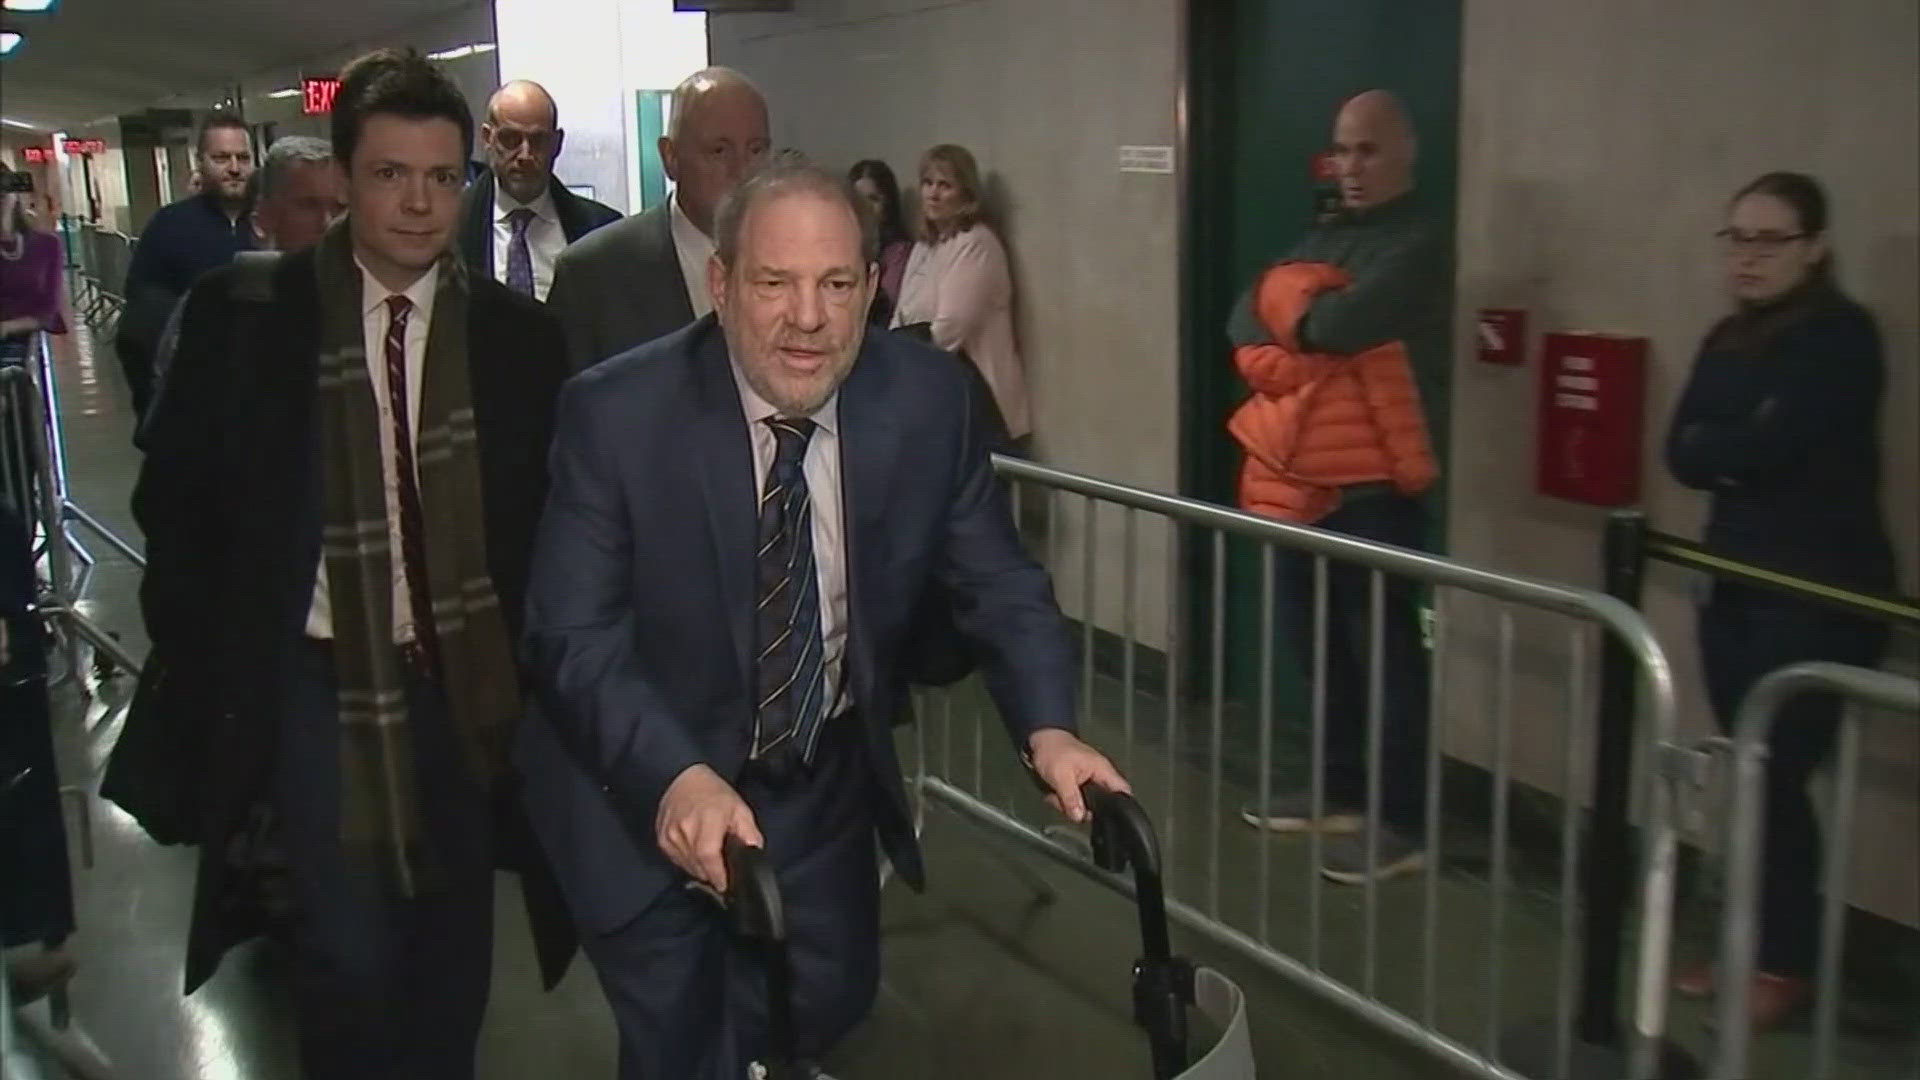 Attorney Arthur Aidala said Weinstein was moved to Bellevue Hospital in Manhattan after his arrival on Friday to city jails.